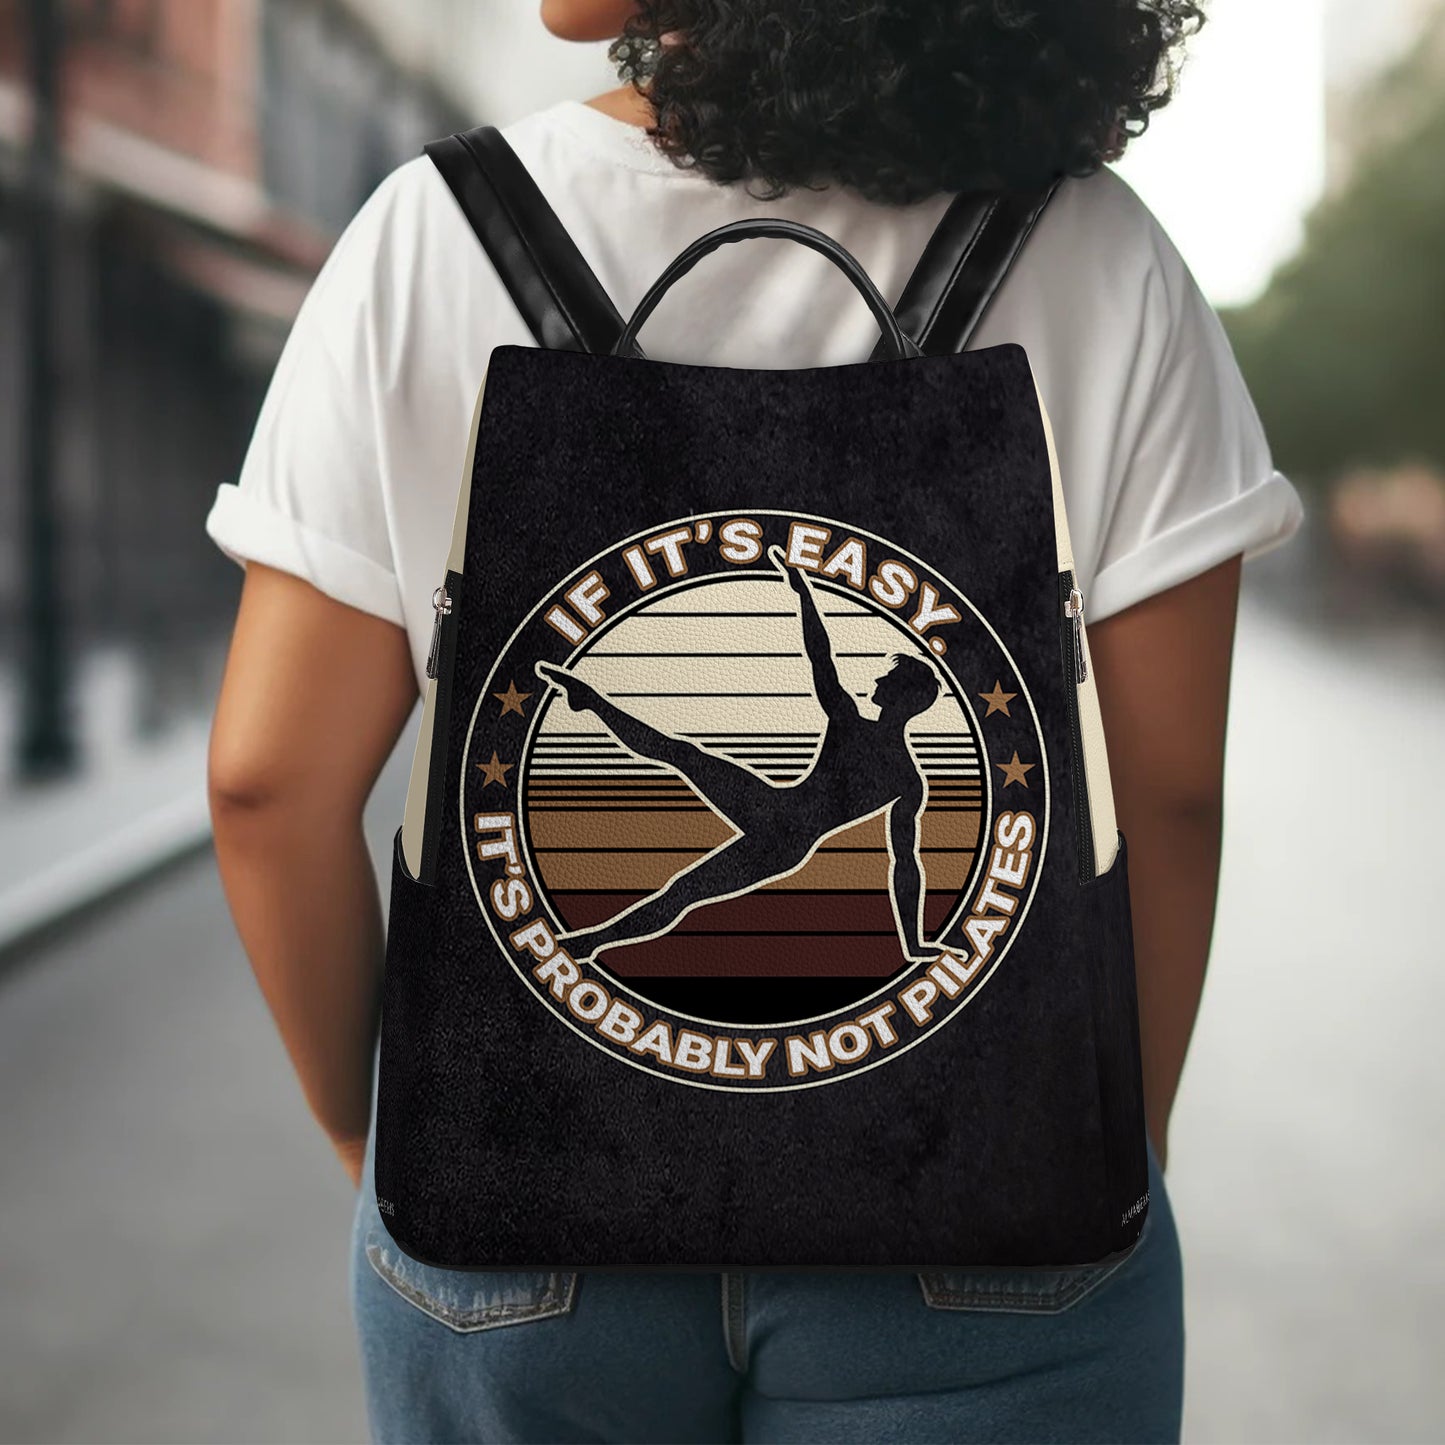 If It's Easy. It's Probably Not Pilates - Personalized Leather BackPack - BP_FN06